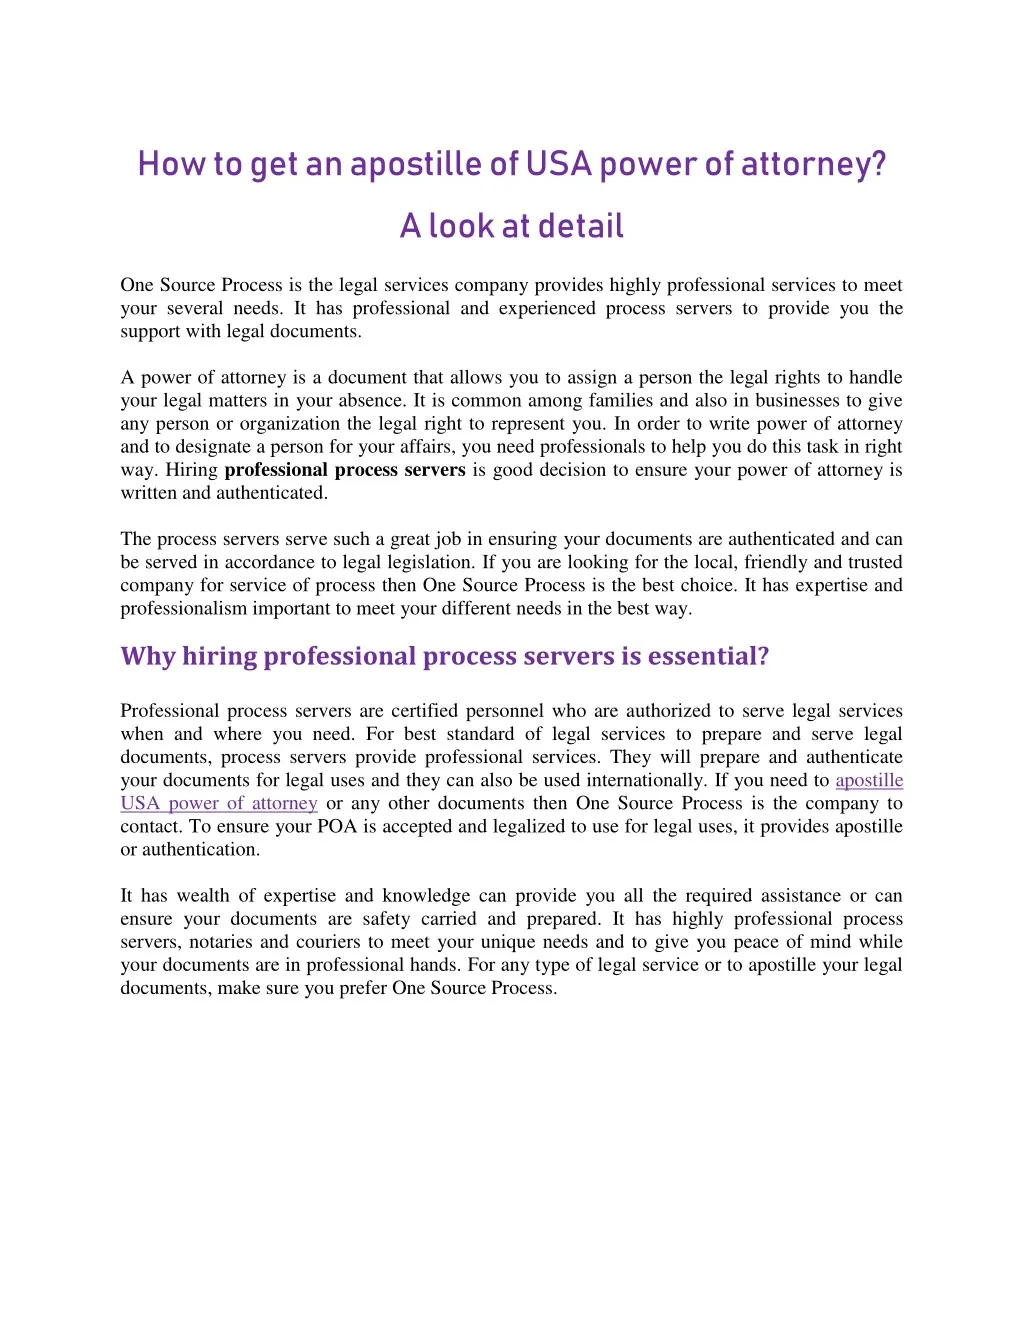 how to get an apostille of usa power of attorney